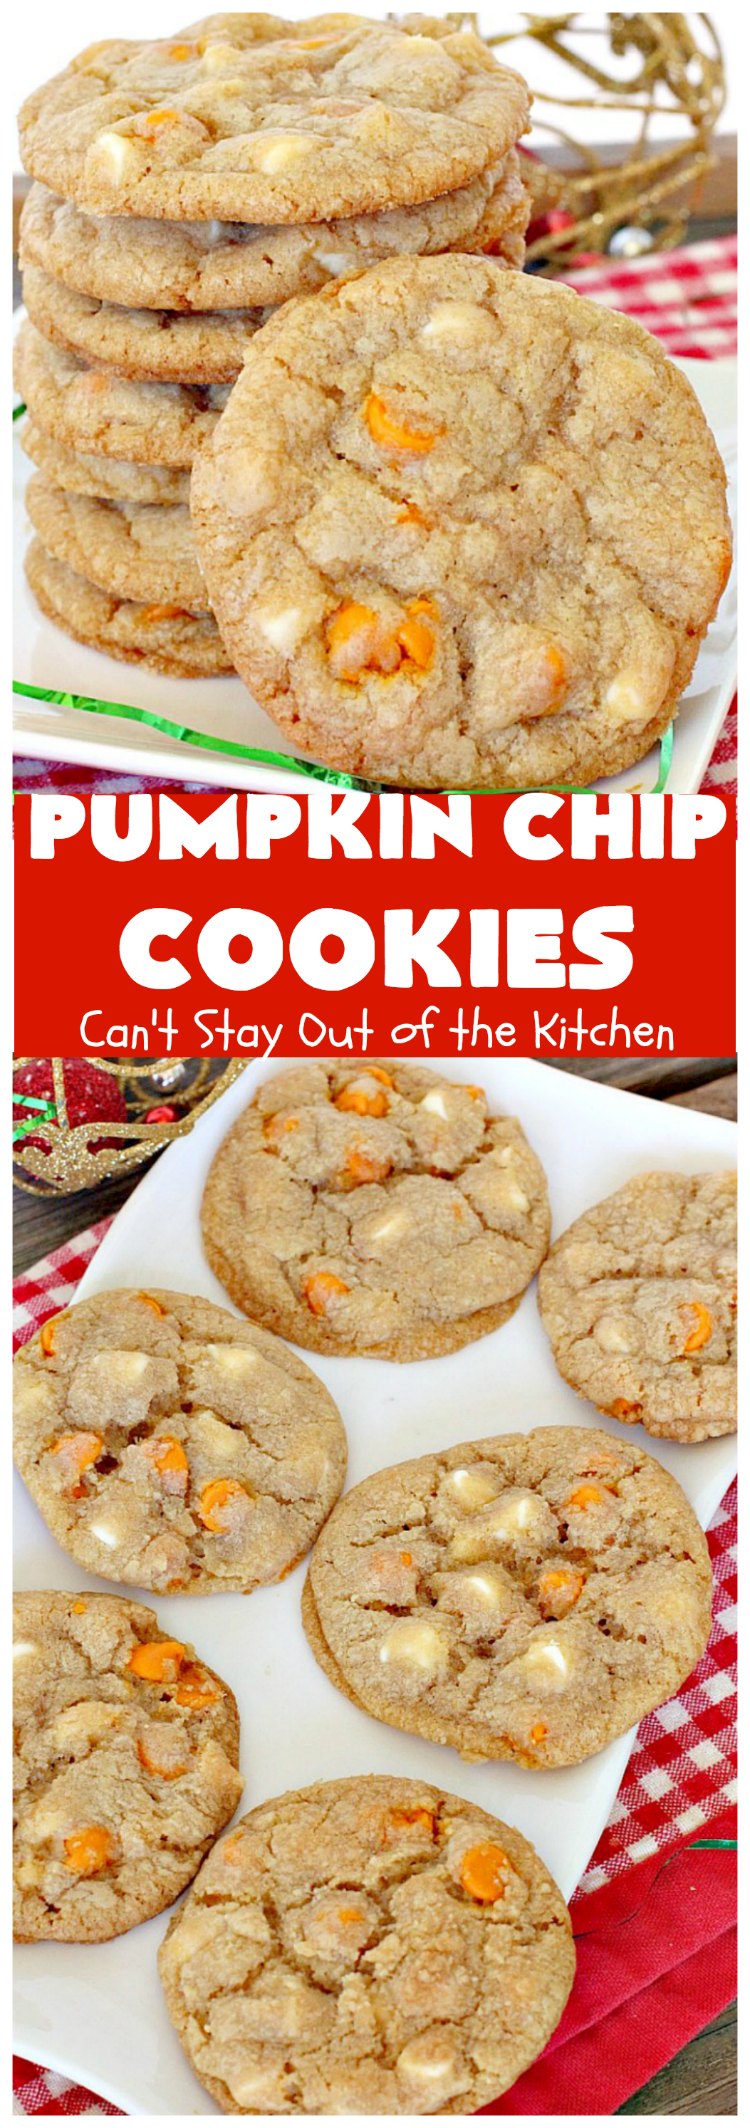 Pumpkin Chip Cookies | Can't Stay Out of the Kitchen | these heavenly #cookies use #pumpkin 'n spice chips & vanilla chips. They are absolutely divine! Perfect for #fall or #holiday baking. #dessert